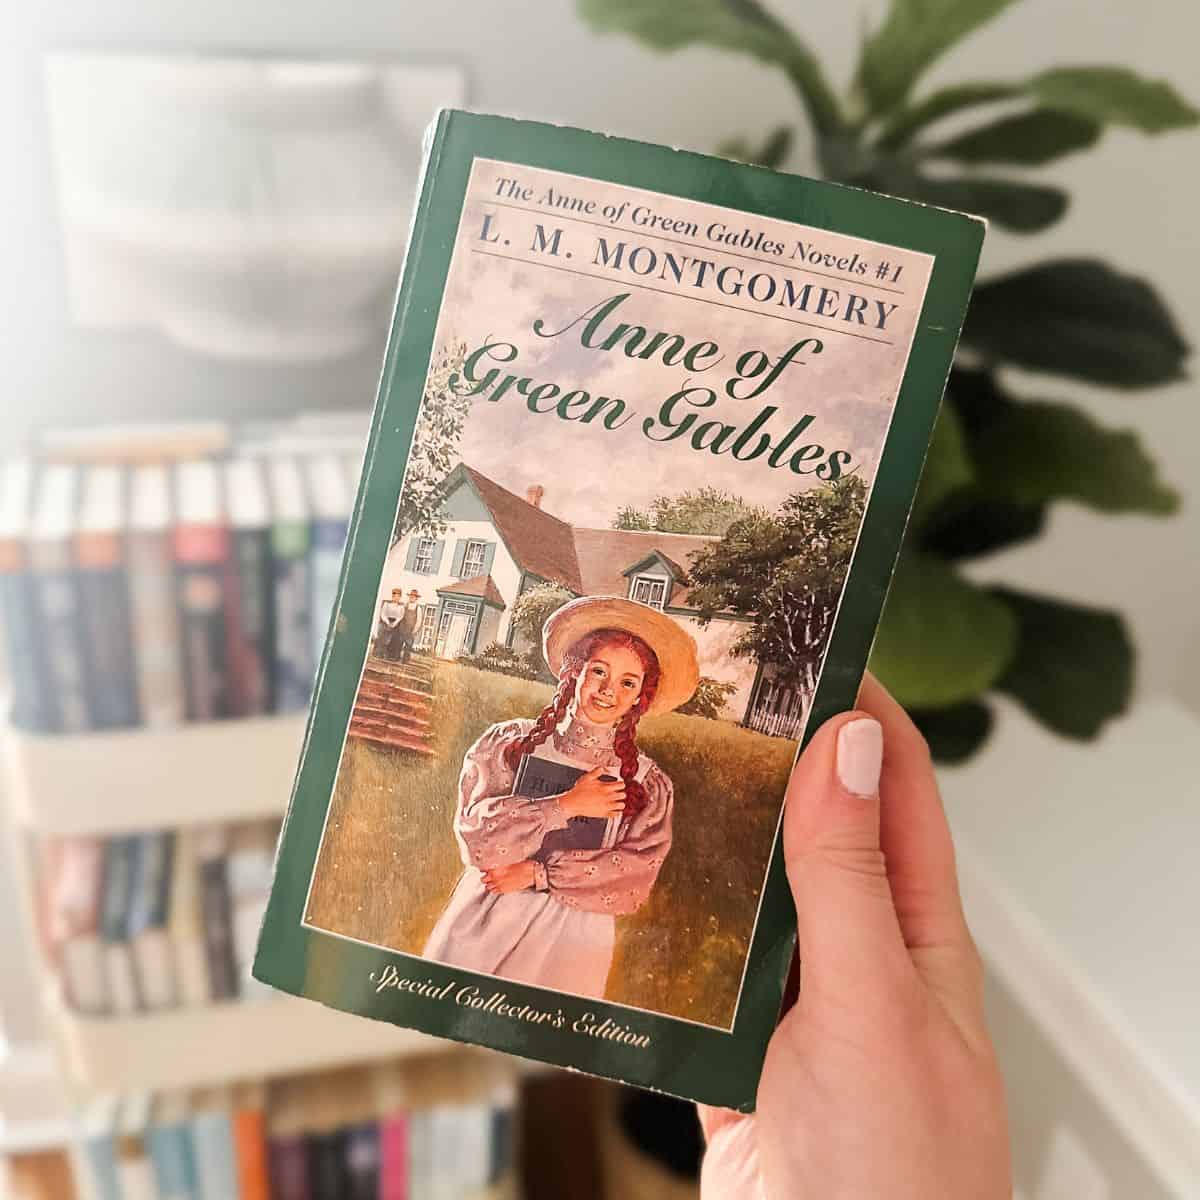 Anne of Green Gables by LM Montgomery held in front of a book cart.